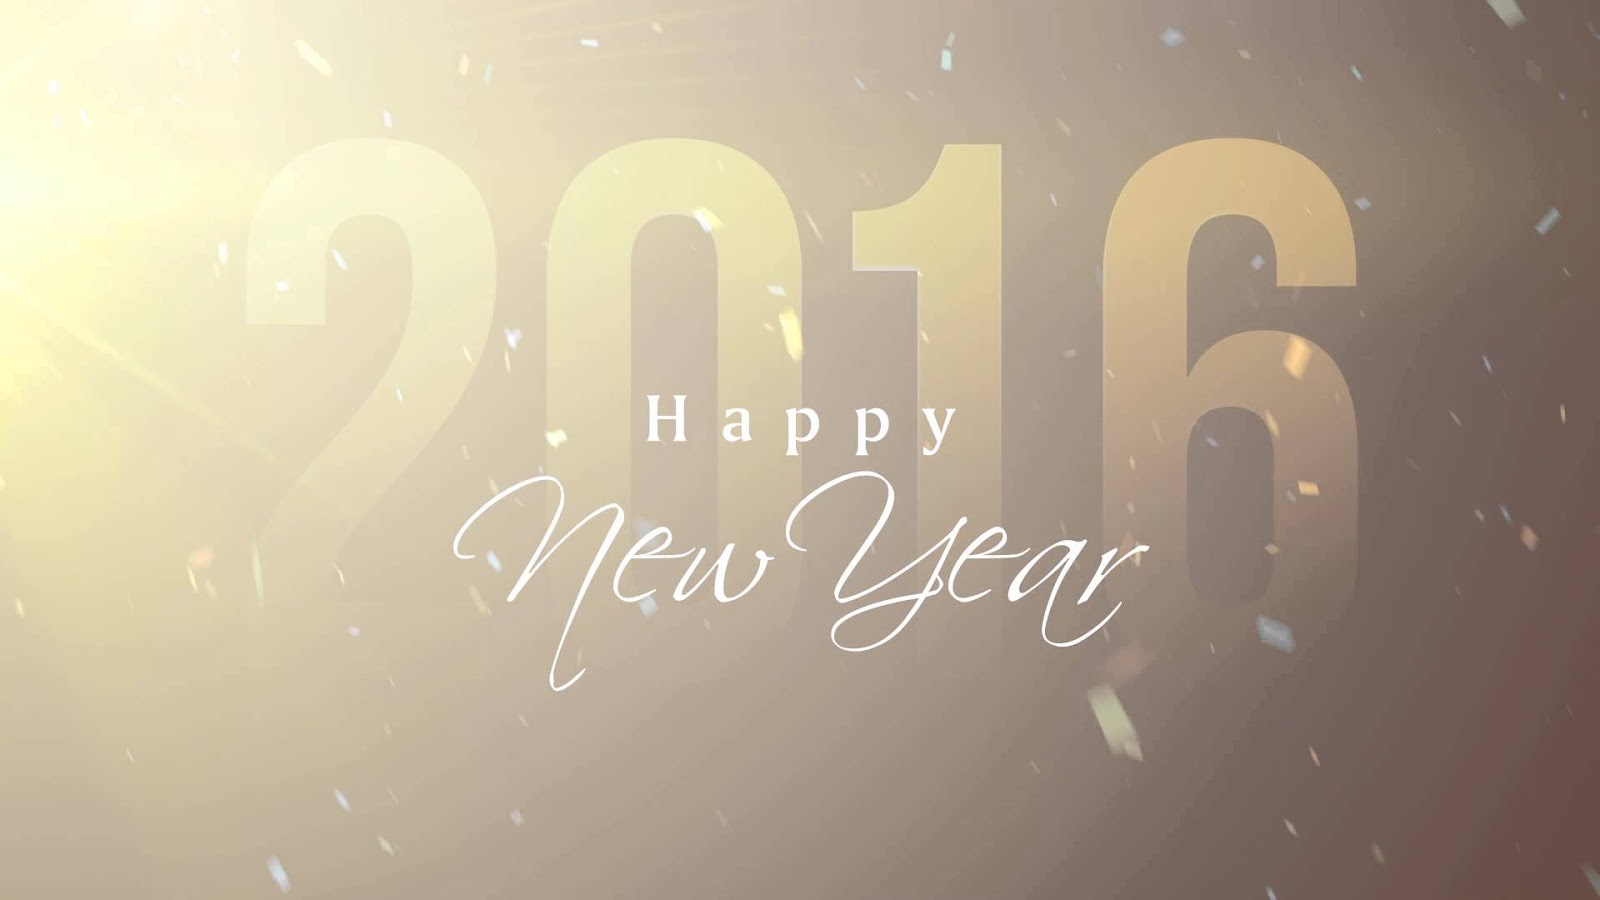 Happy New Year 2016 Images Happy New Year 2016 Wishes Wallpapers 1600x900